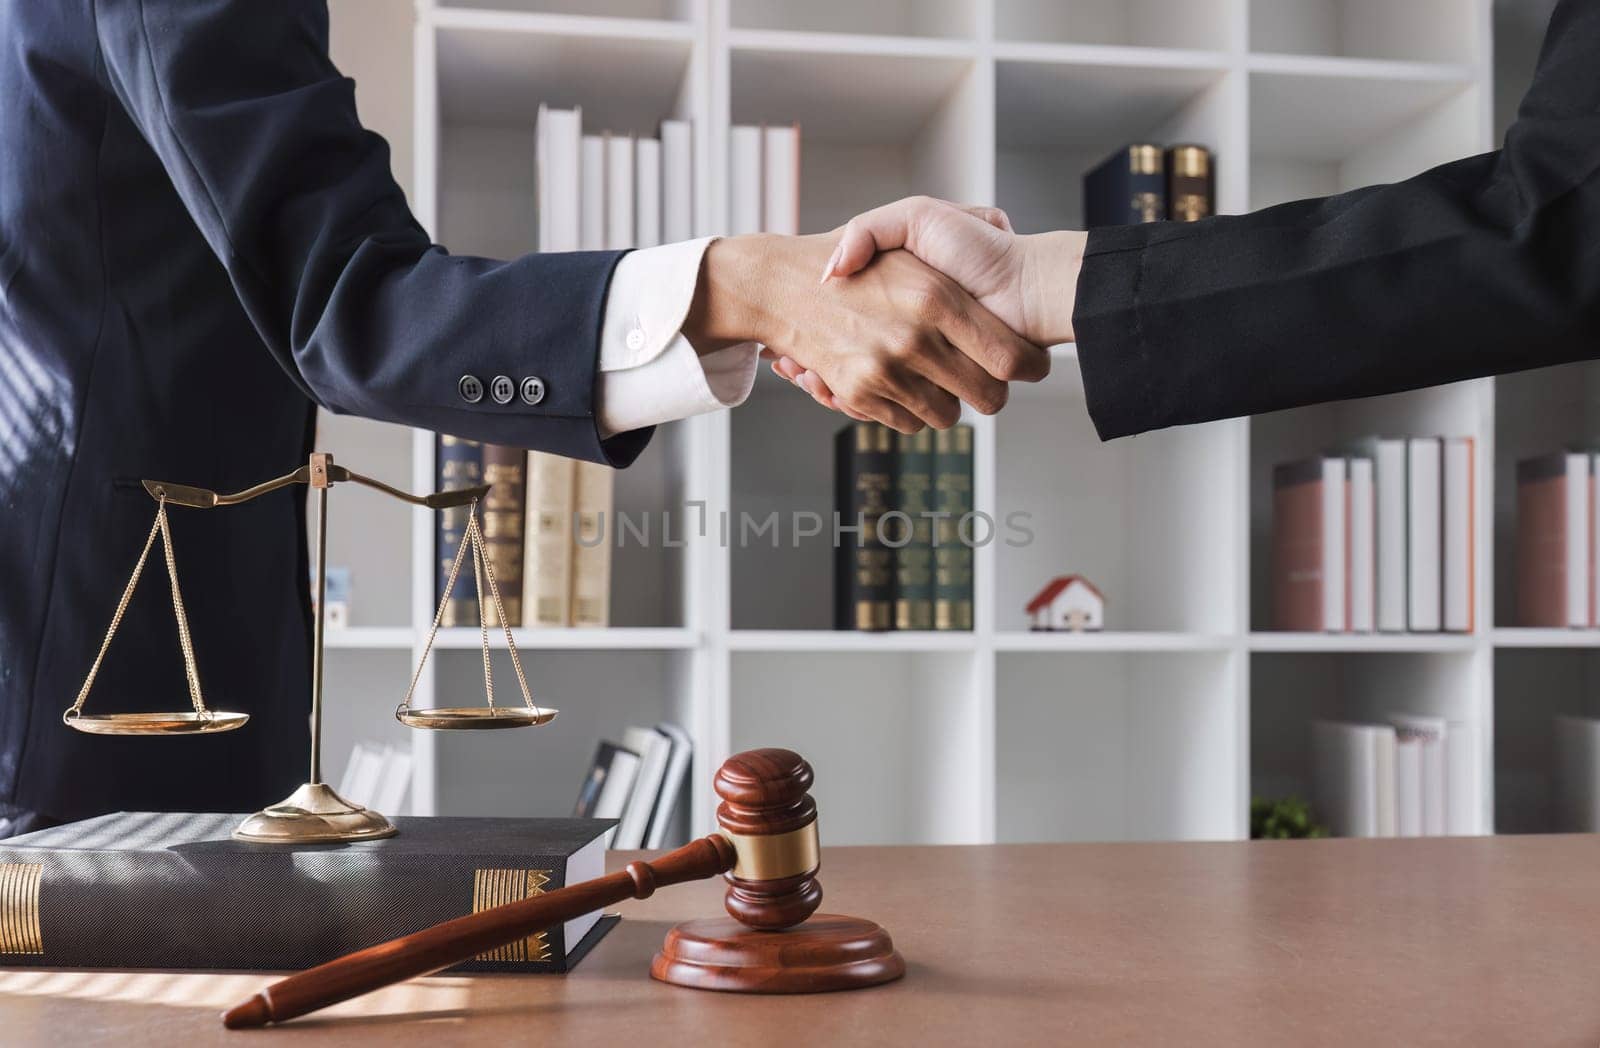 legal advice A lawyer shakes hands with a client after a successful consultation..